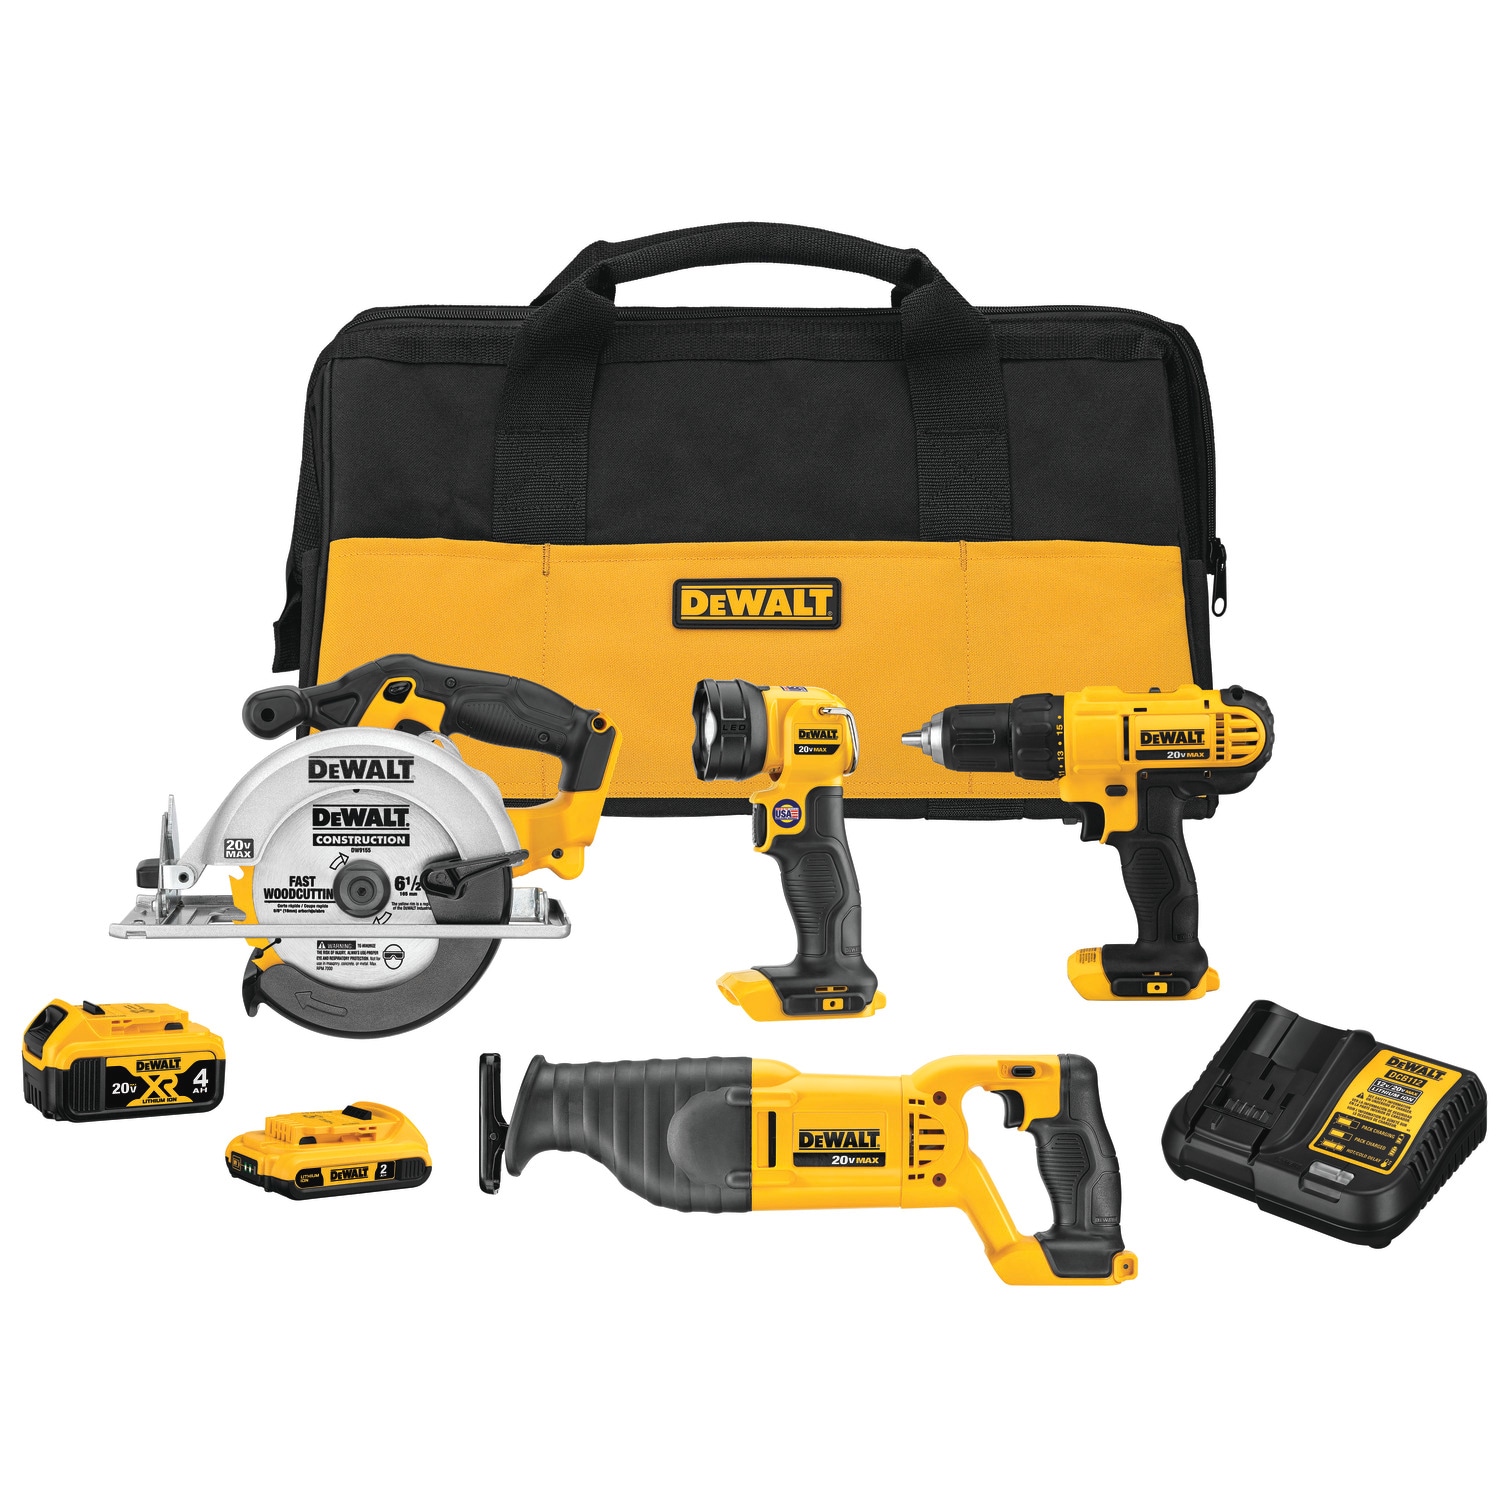 DEWALT 4-Tool 20-Volt Max Power Tool Combo Kit with Soft Case (2